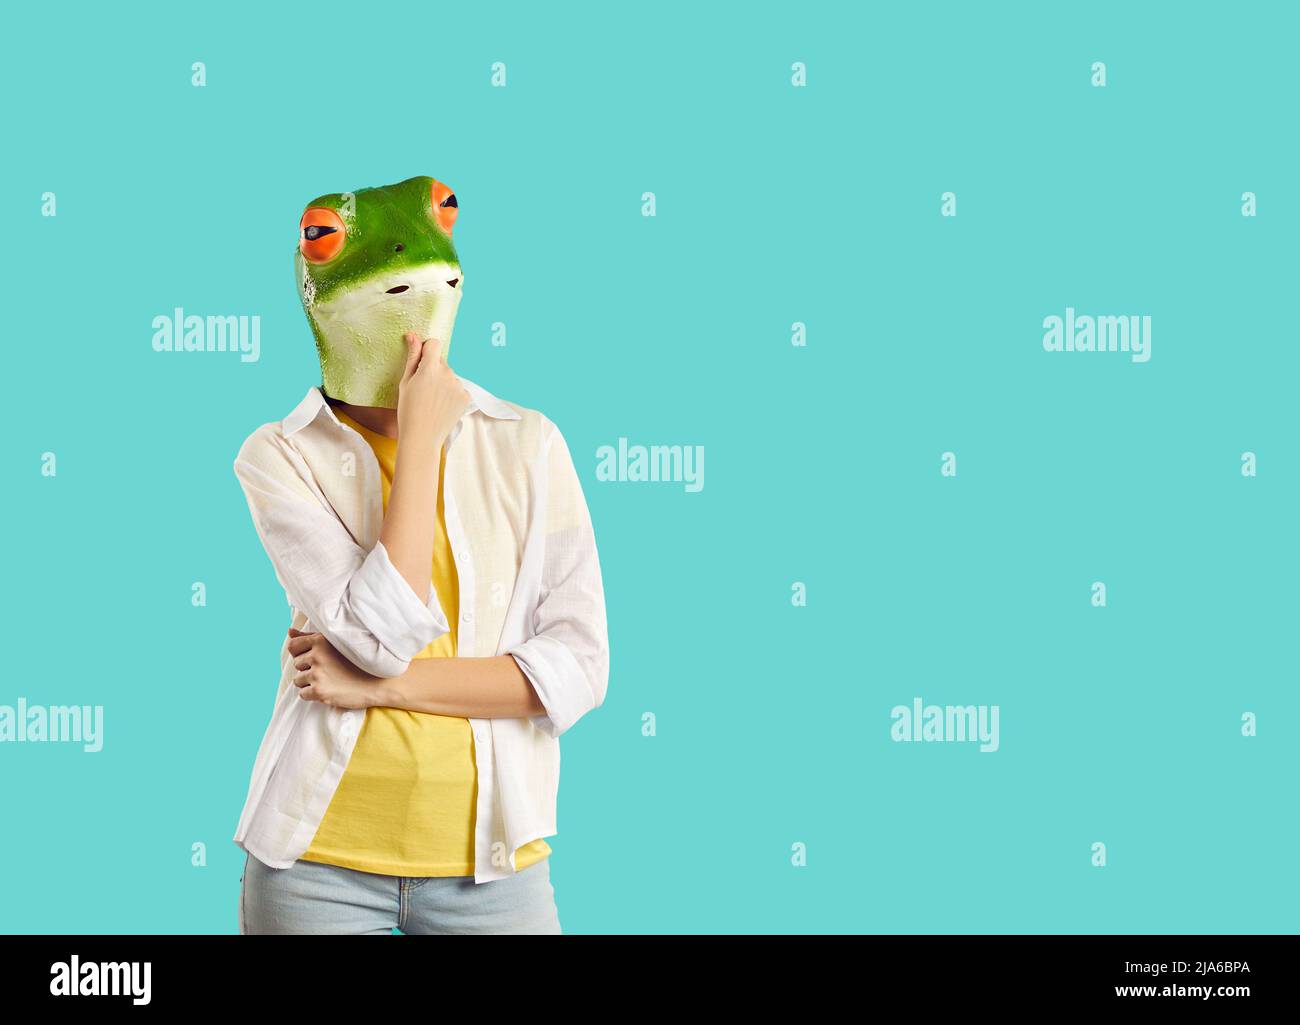 Funny woman in rubber mask of frog stands in pensive pose on turquoise background. Stock Photo